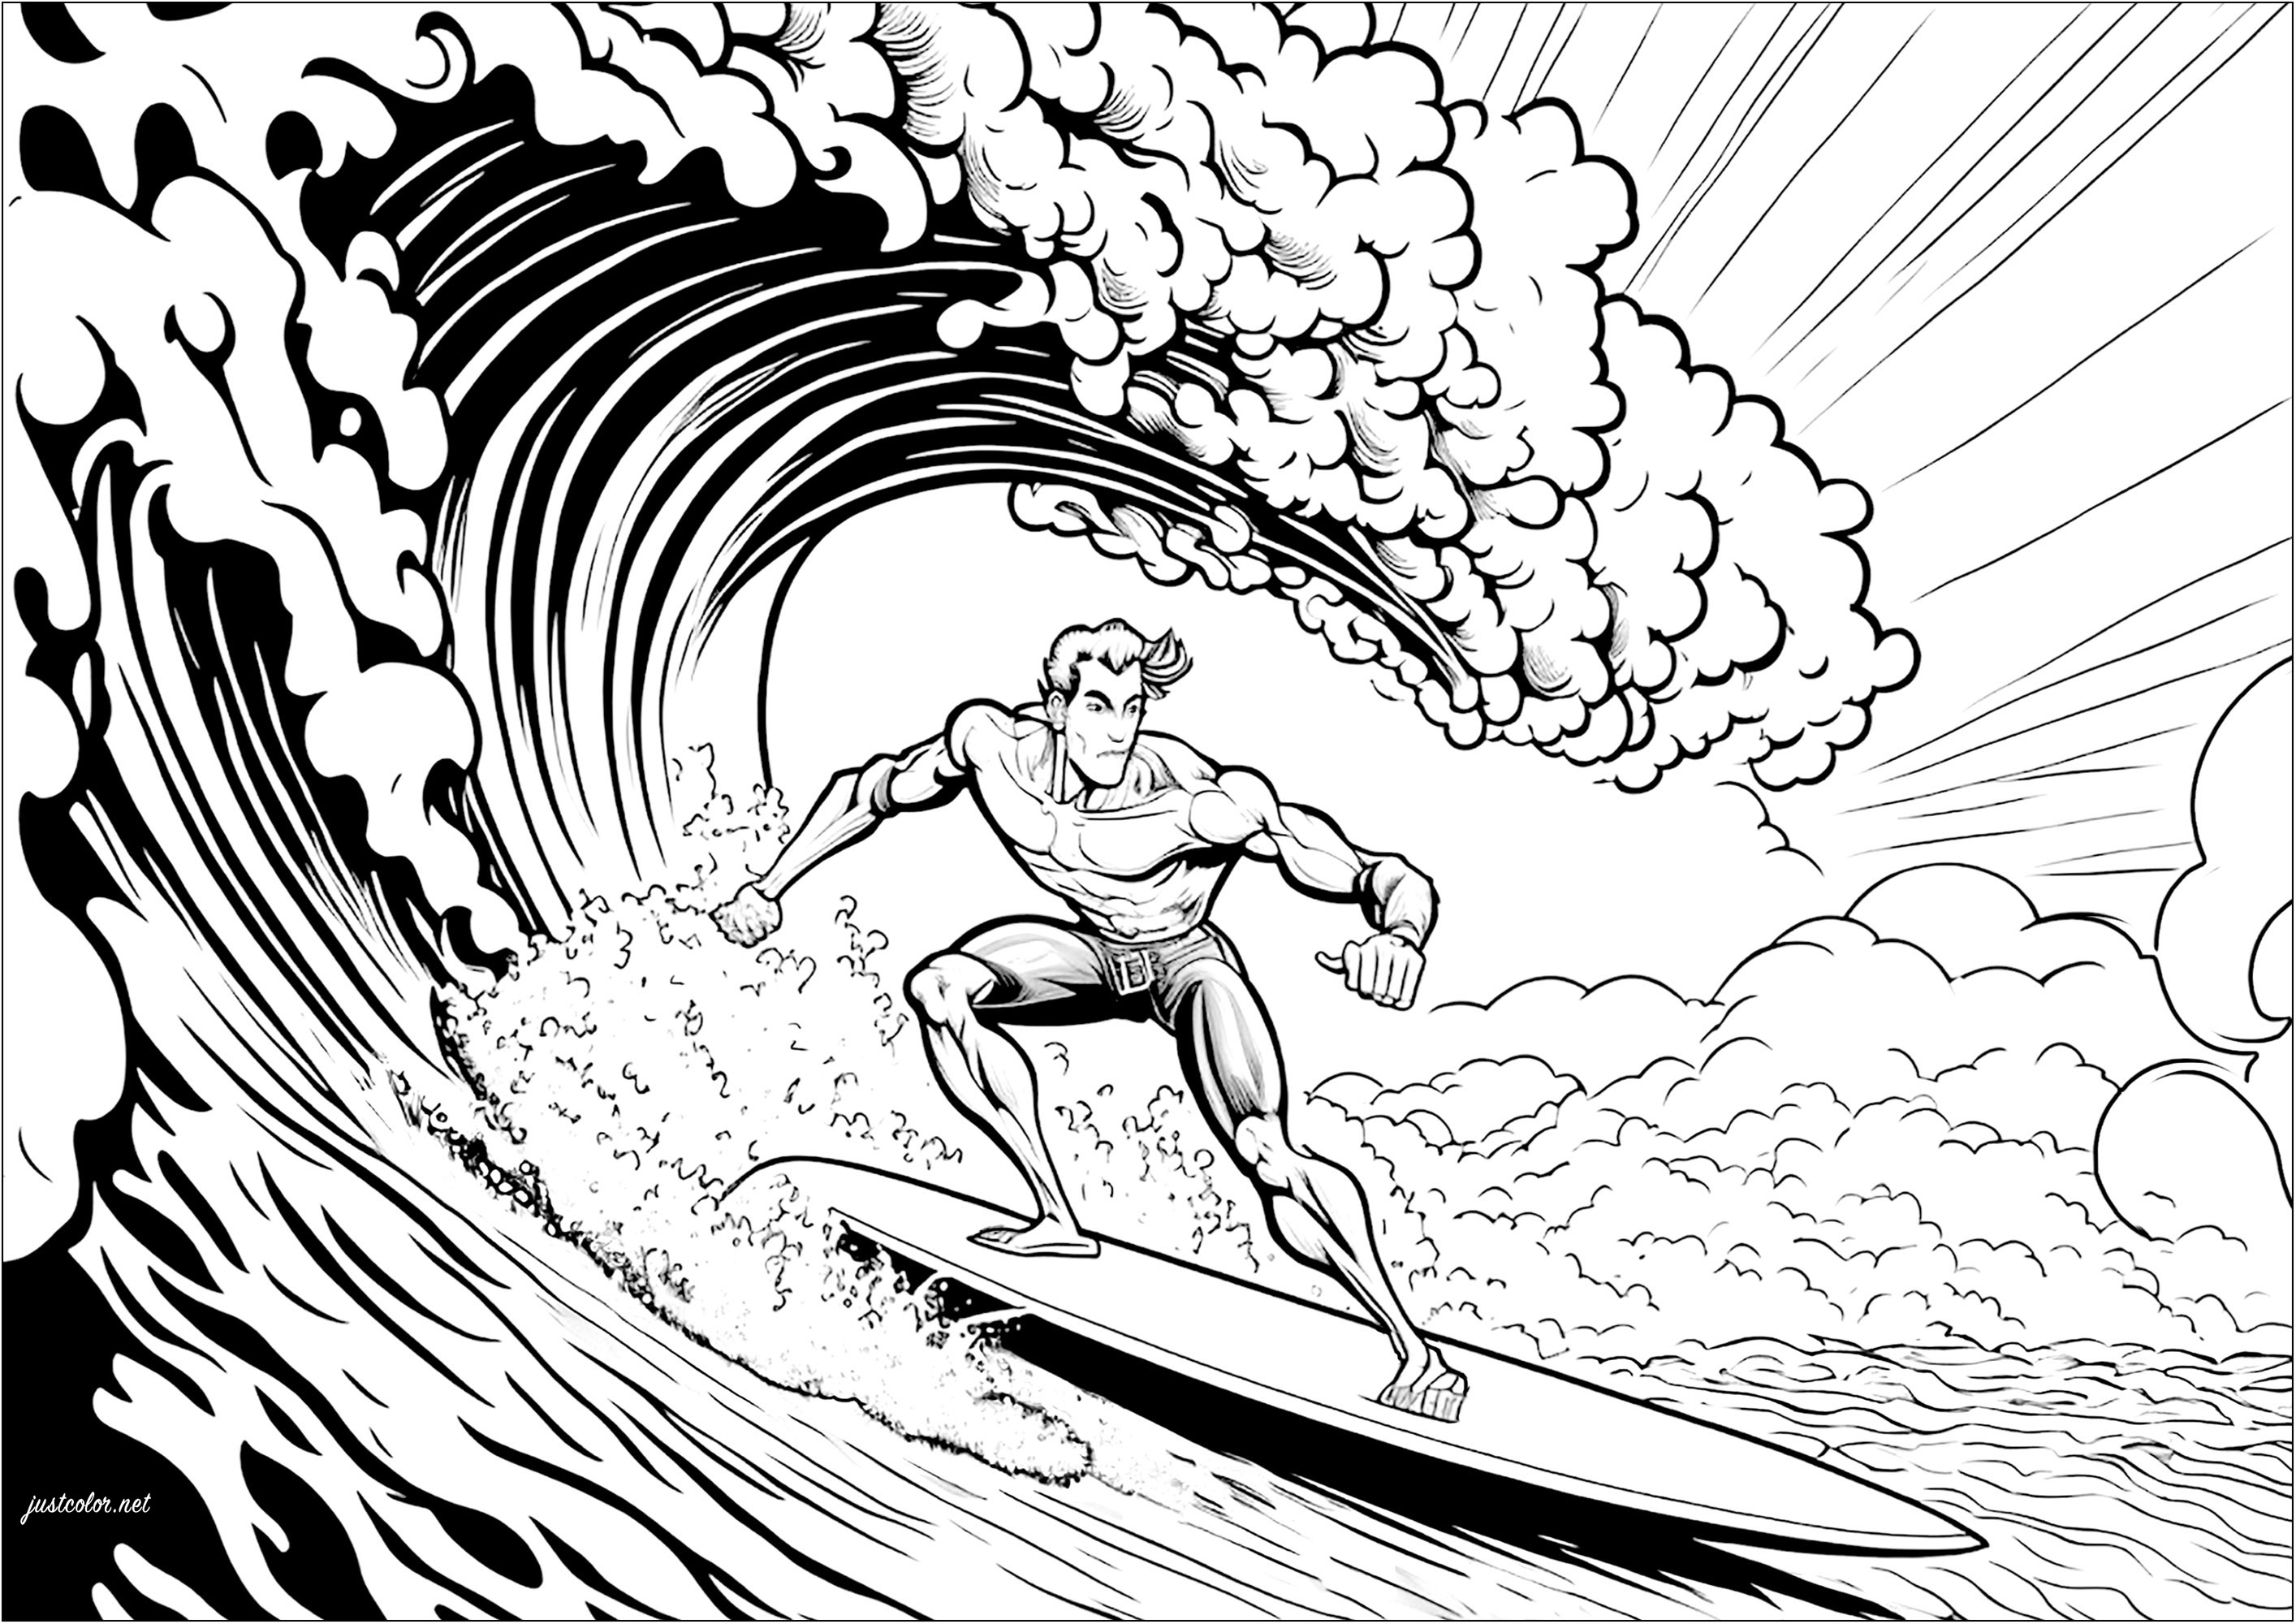 Ride the waves with this fun surfer coloring page !.  Featuring an adrenaline junkie catching a gnarly wave, this illustration is perfect for everyone who loves the ocean. With the sun shining and seagulls flying overhead, use your imagination to bring this scene to life with bright colors.